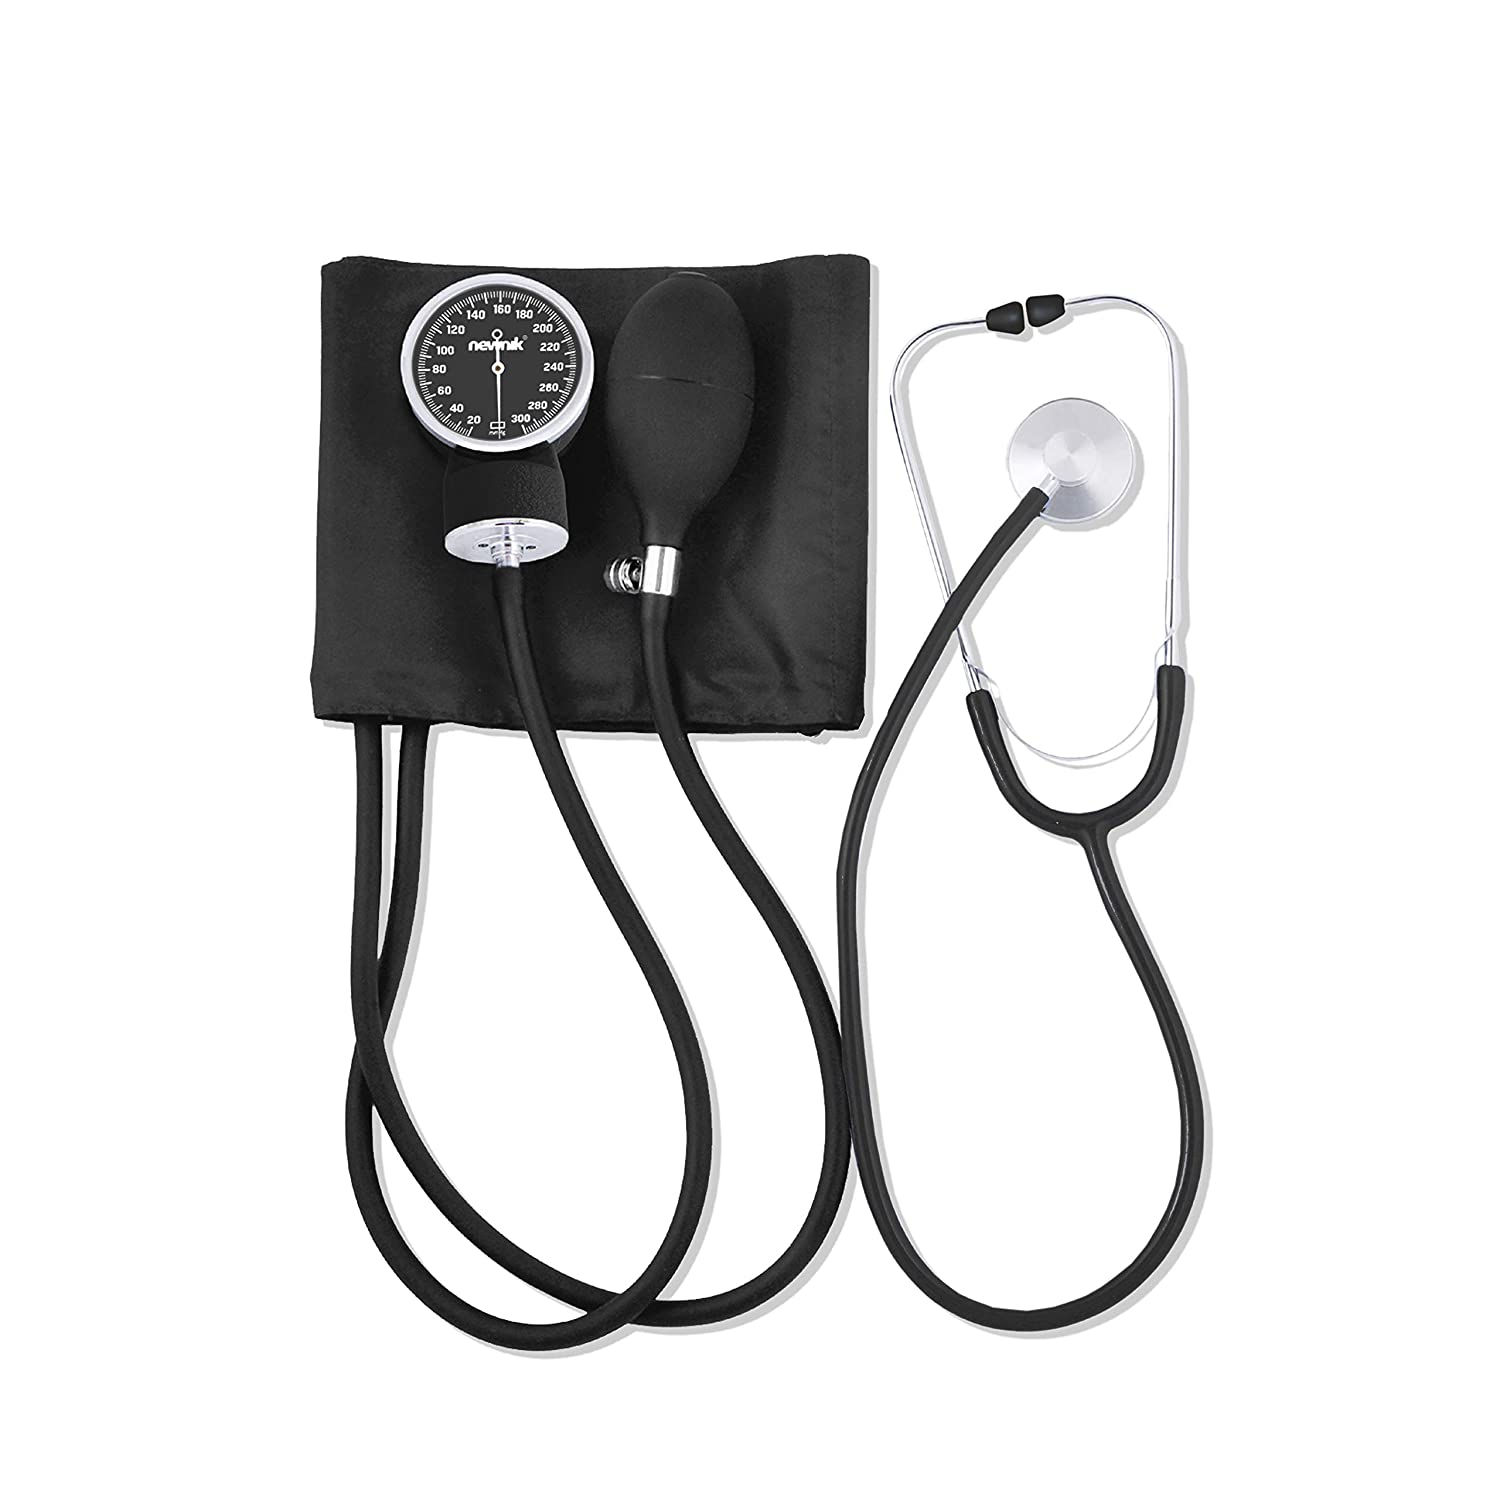 Newnik SP602 Aneroid Sphygmomanometer - Professional Blood Pressure Monitor with Cuff and Carrying Case (Stethoscope Not Included)